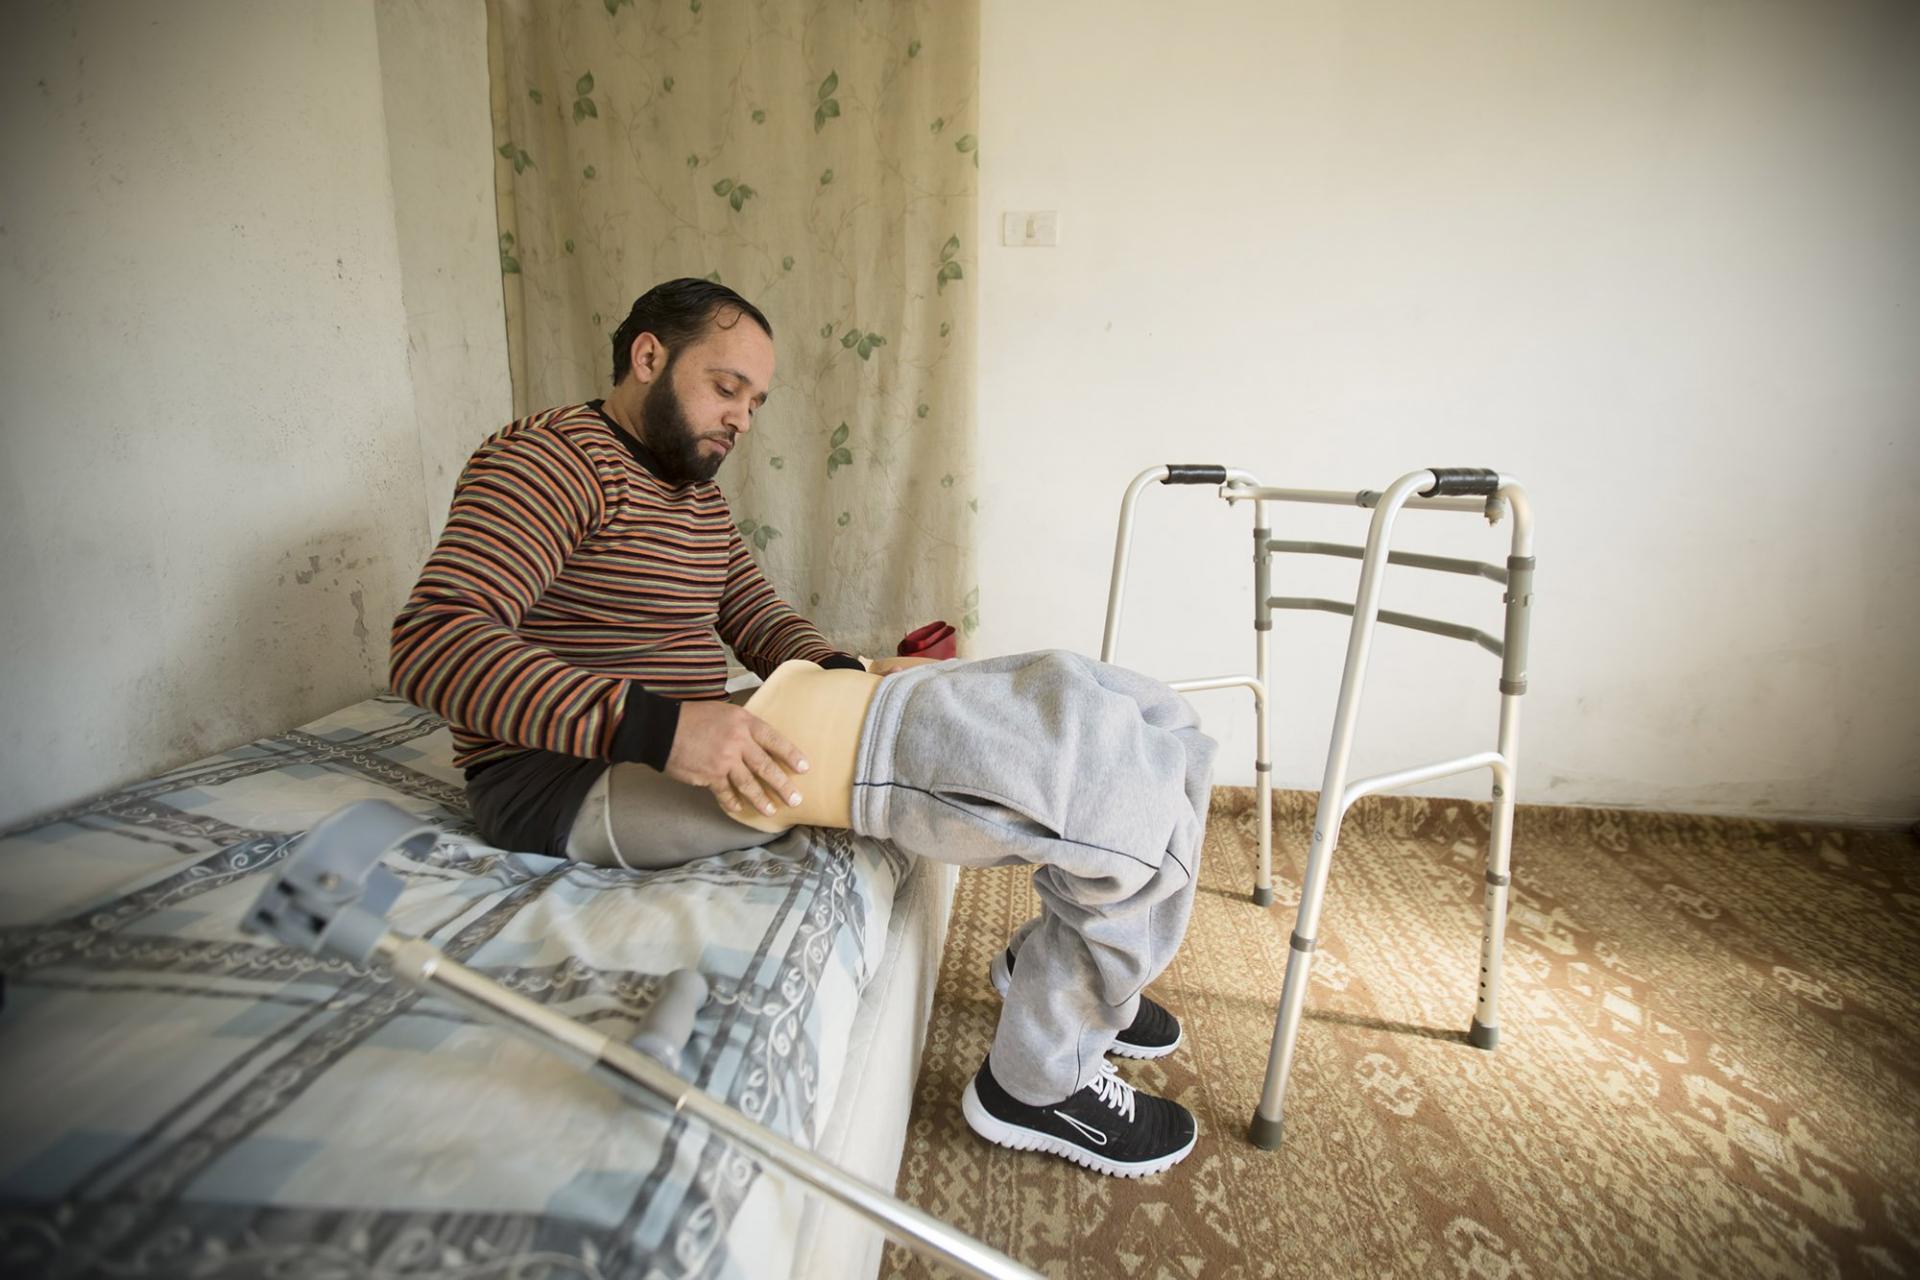 Syria, MSF, War-wounded Patient